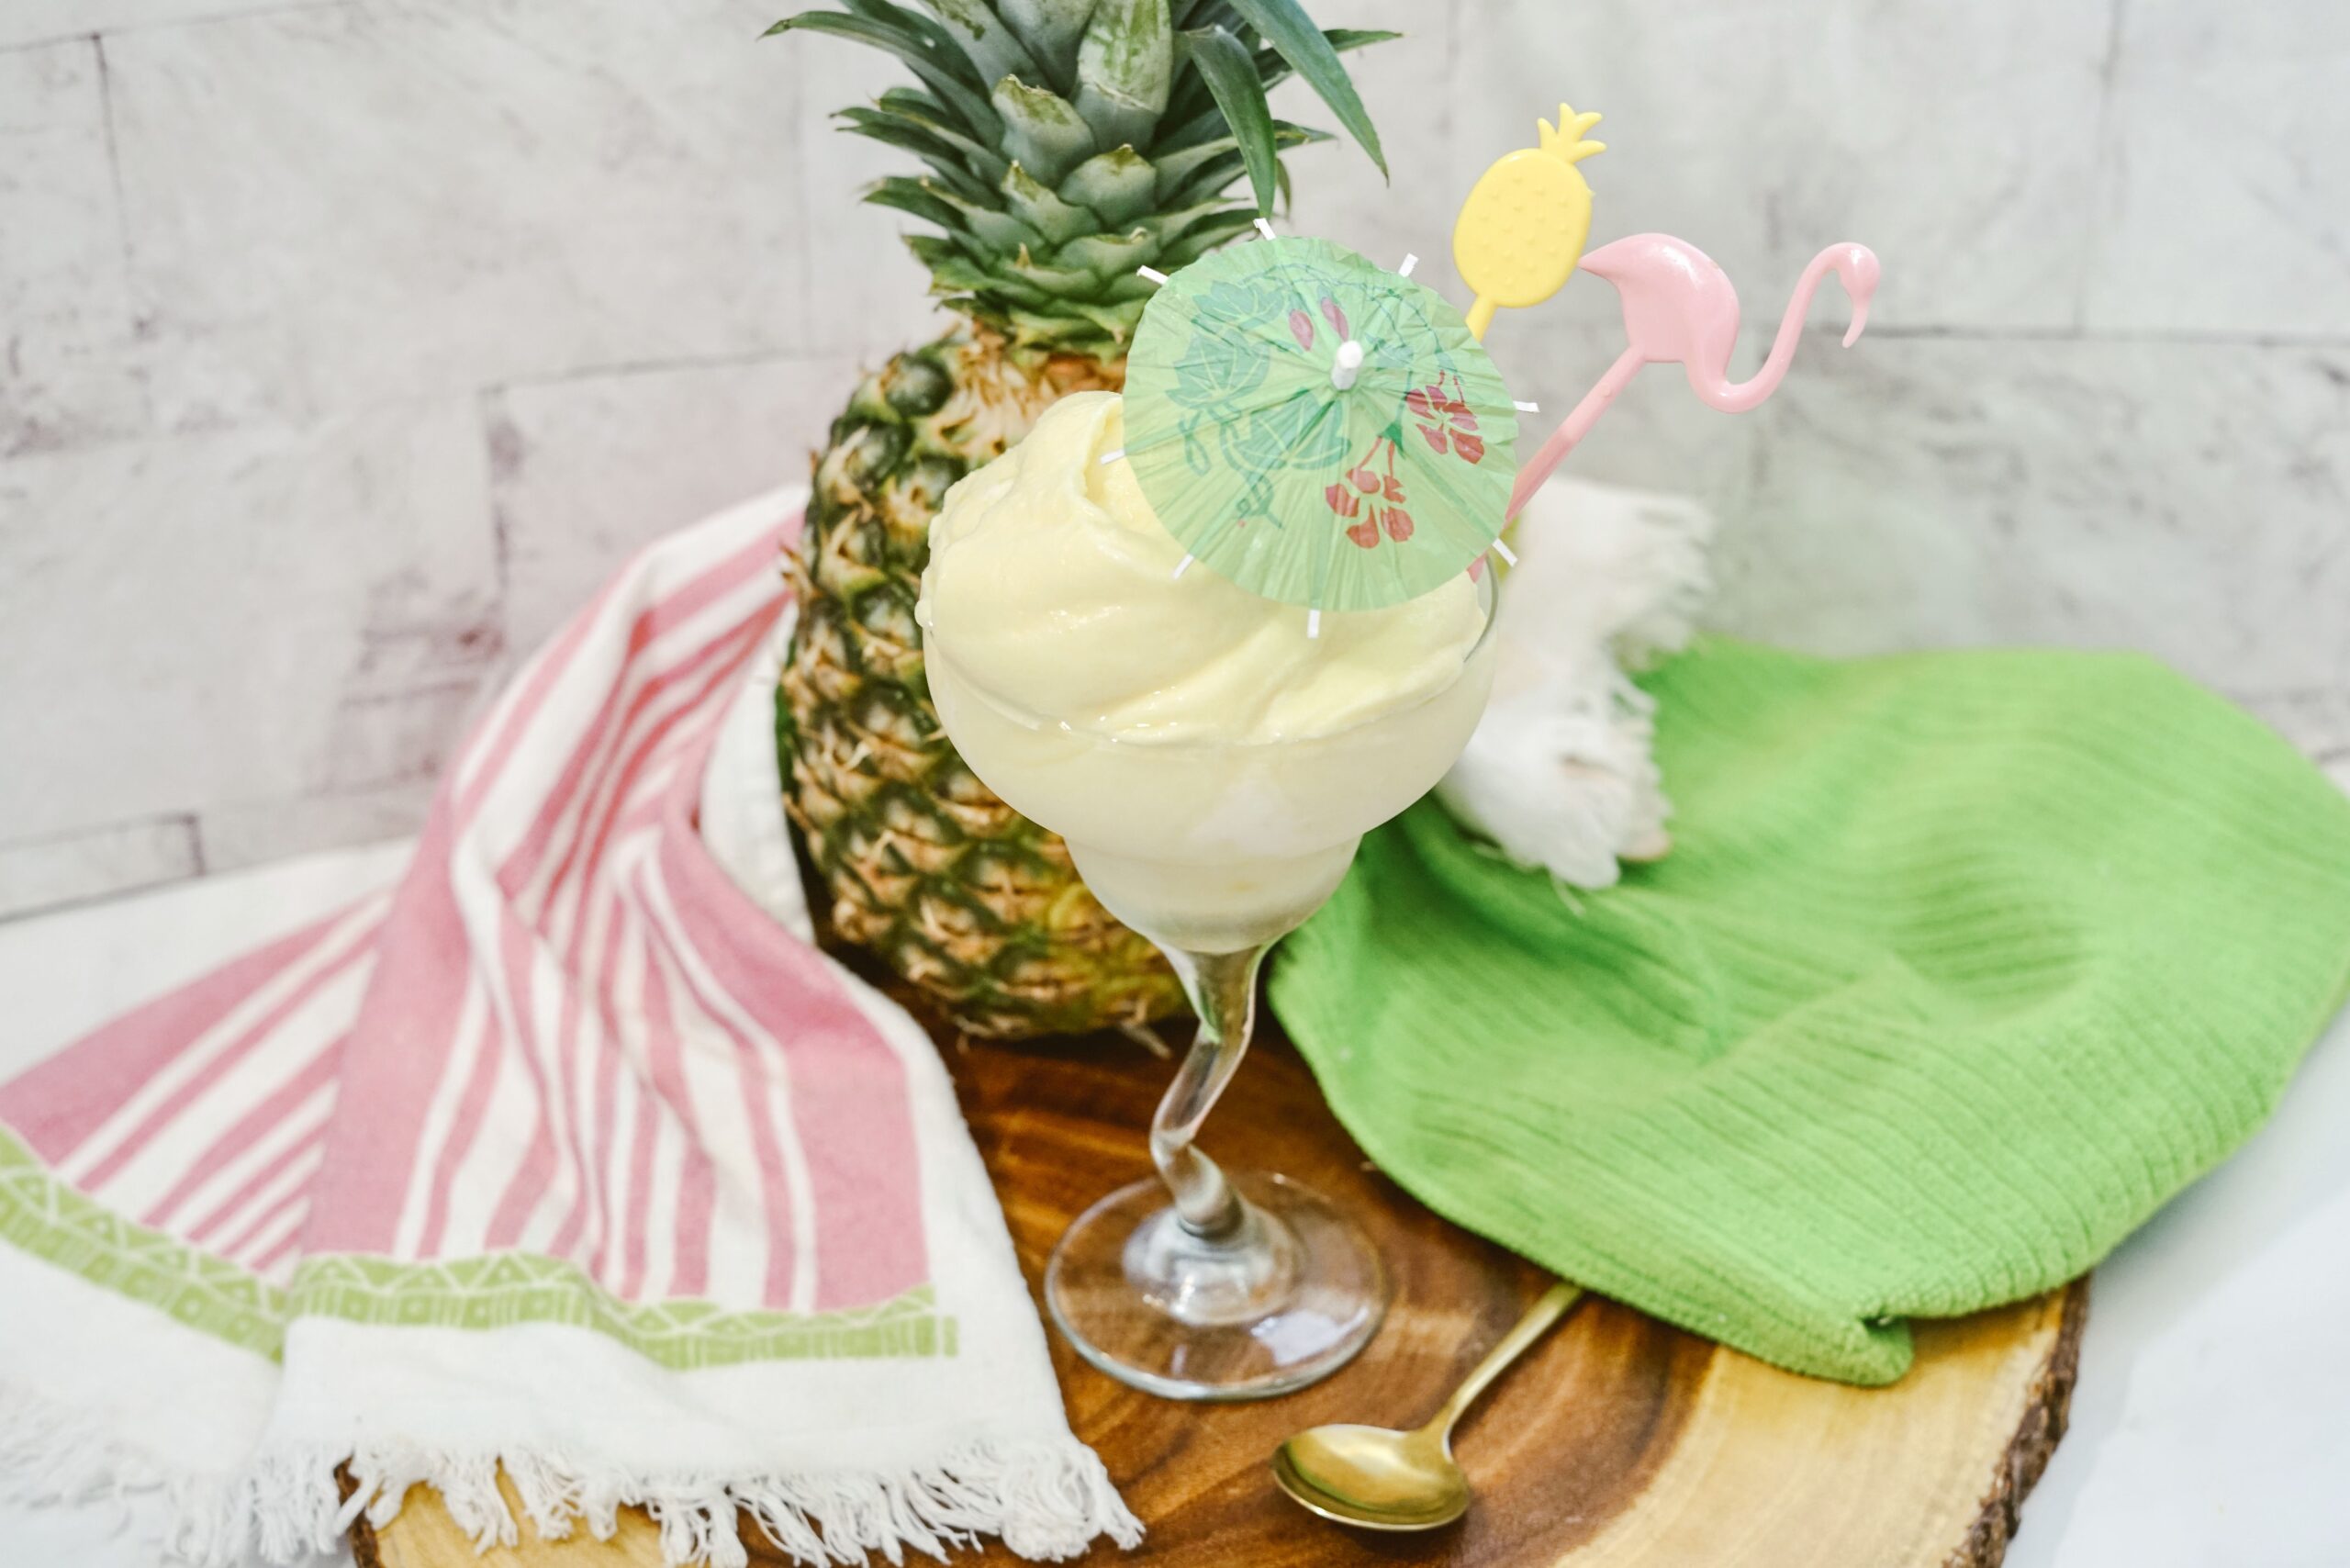 Copycat Disney Dole Whip Recipe – How to Make Disney’s Famous Pineapple Dole Whip at Home